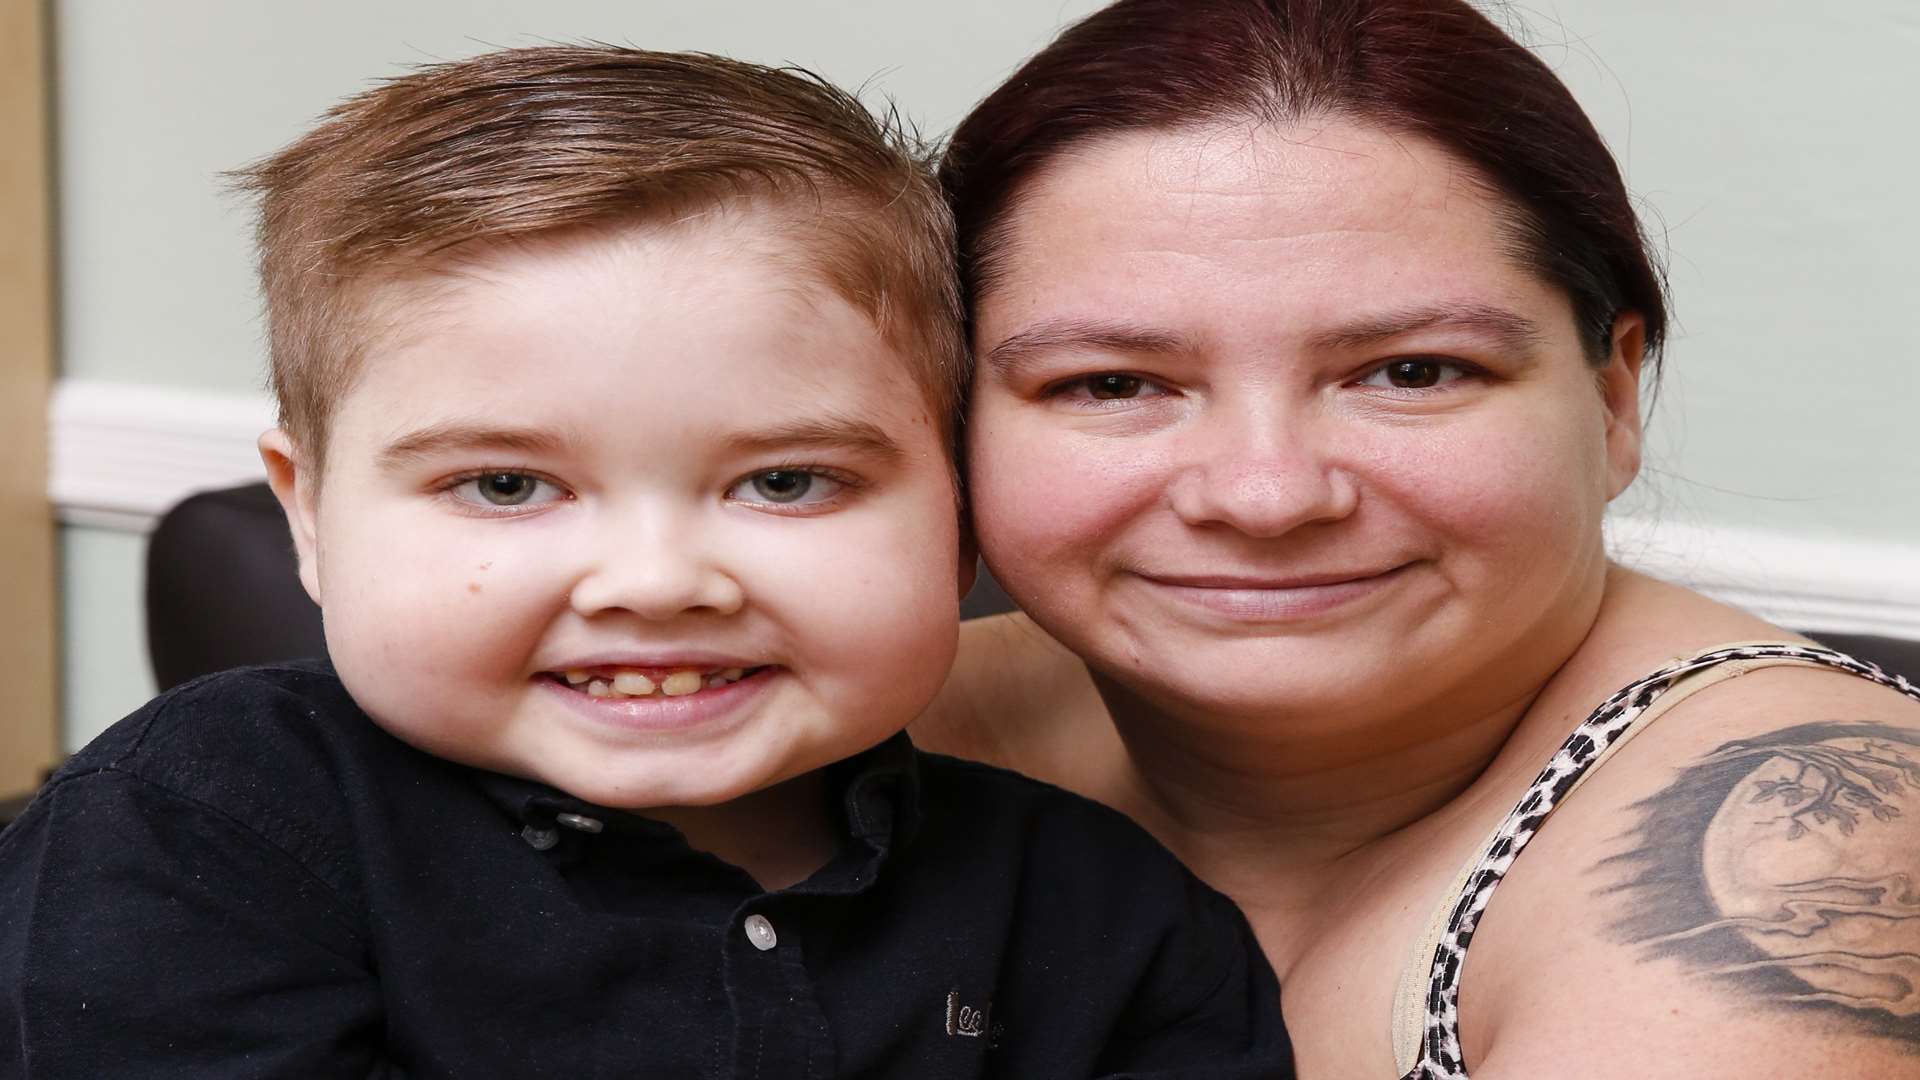 Jamie-Lee Dearing with his mum Jodie, who are trying to raise £150,000 for lifesaving treatment